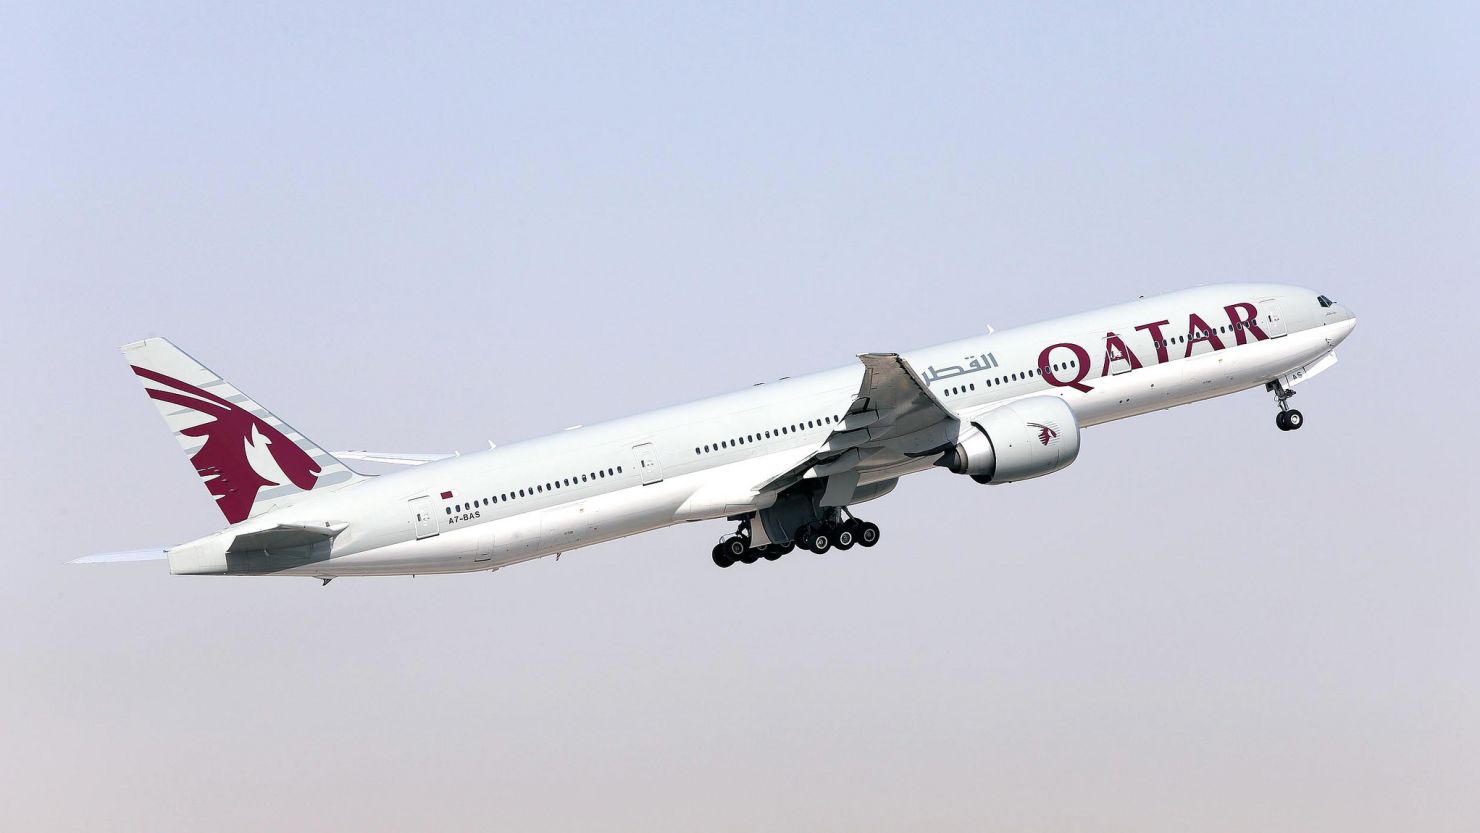 A planned direct flight between Doha, Qatar, and Auckland, New Zealand, would be the world's longest.